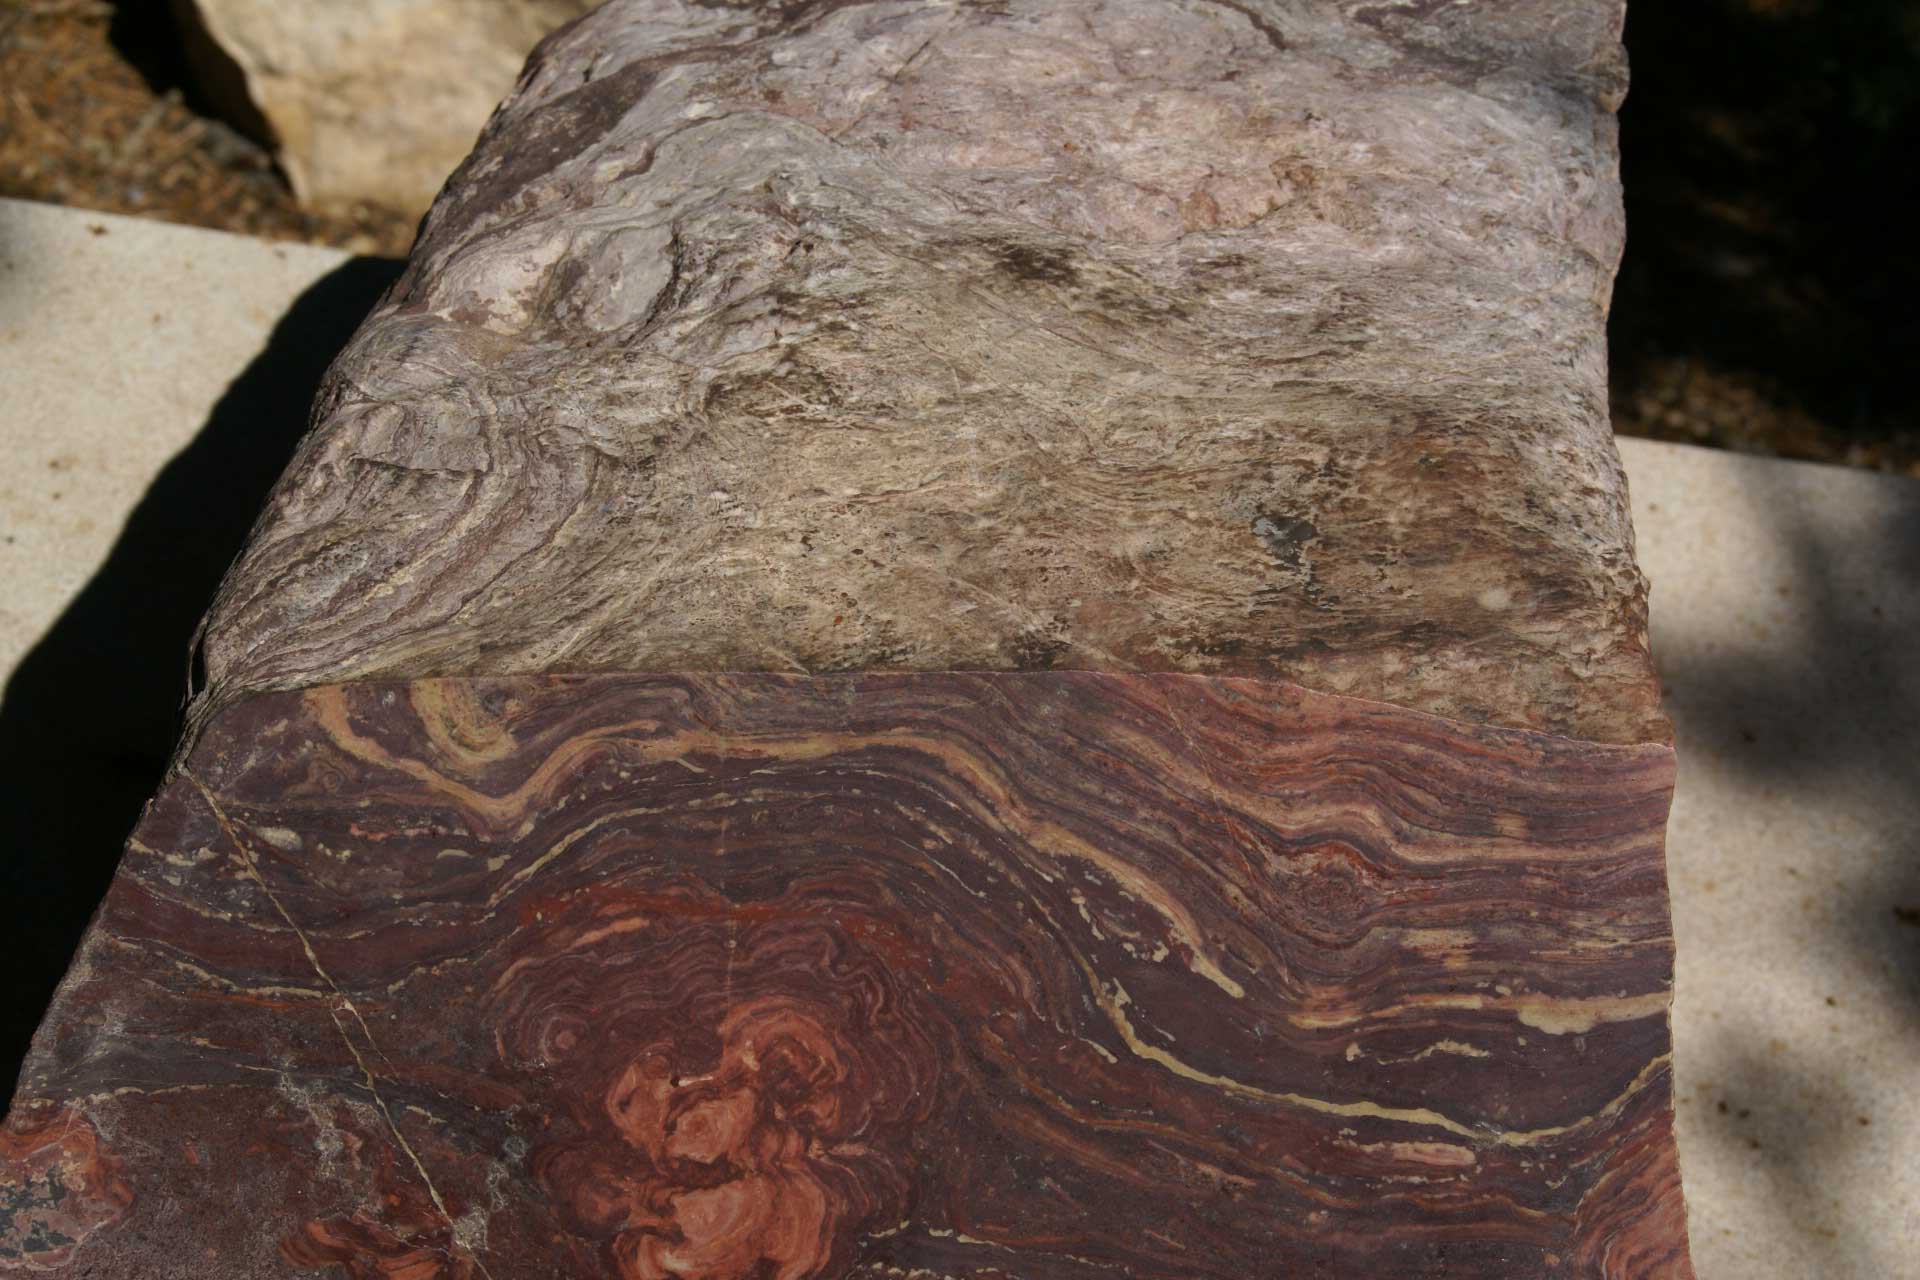 Photograph of a stromatolite fossil from the Grand Canyon.